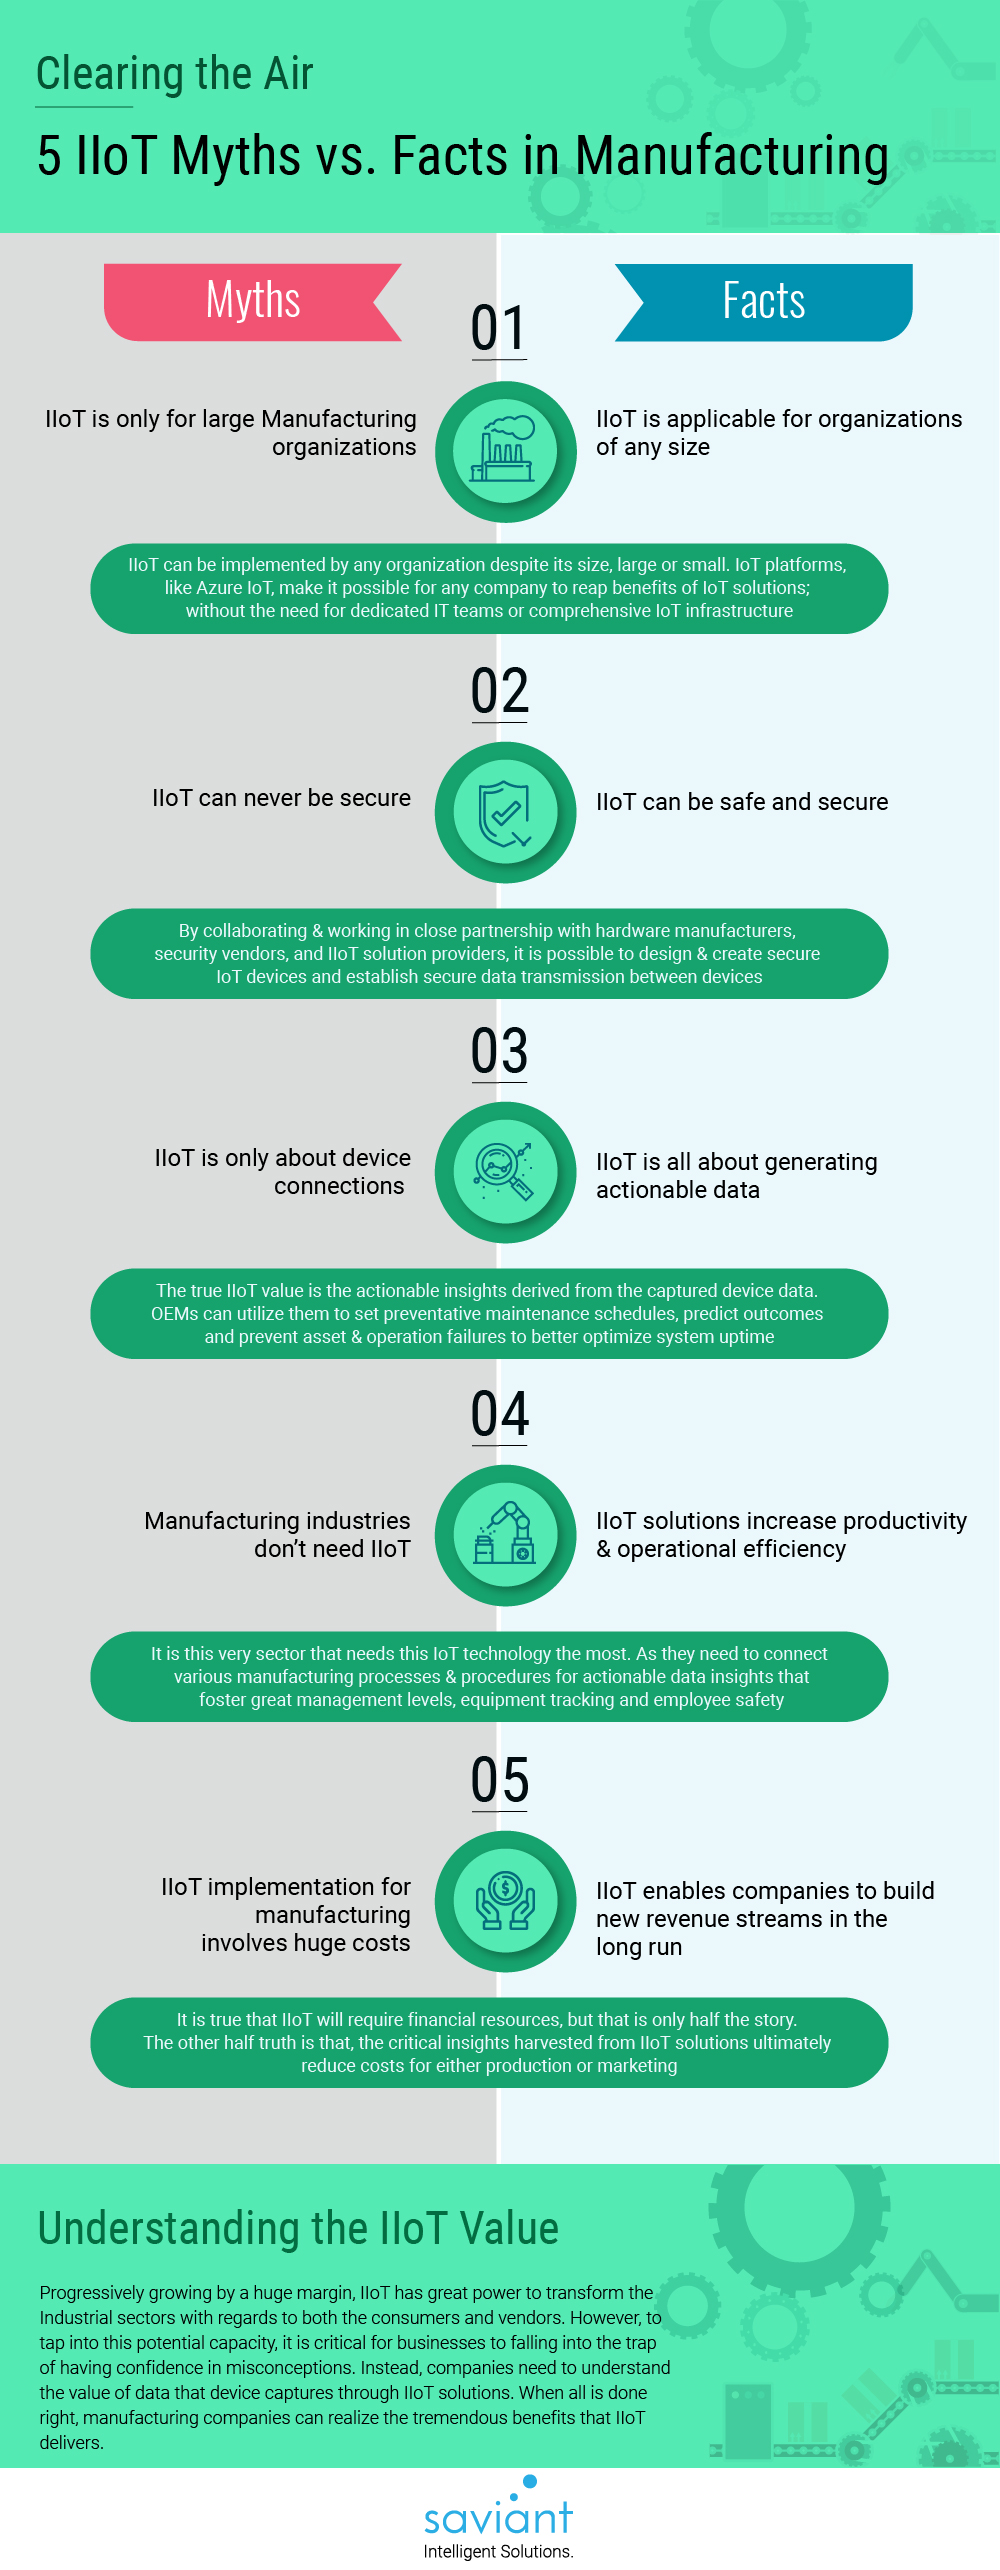 IIoT implementation myths in manufacturing infographic